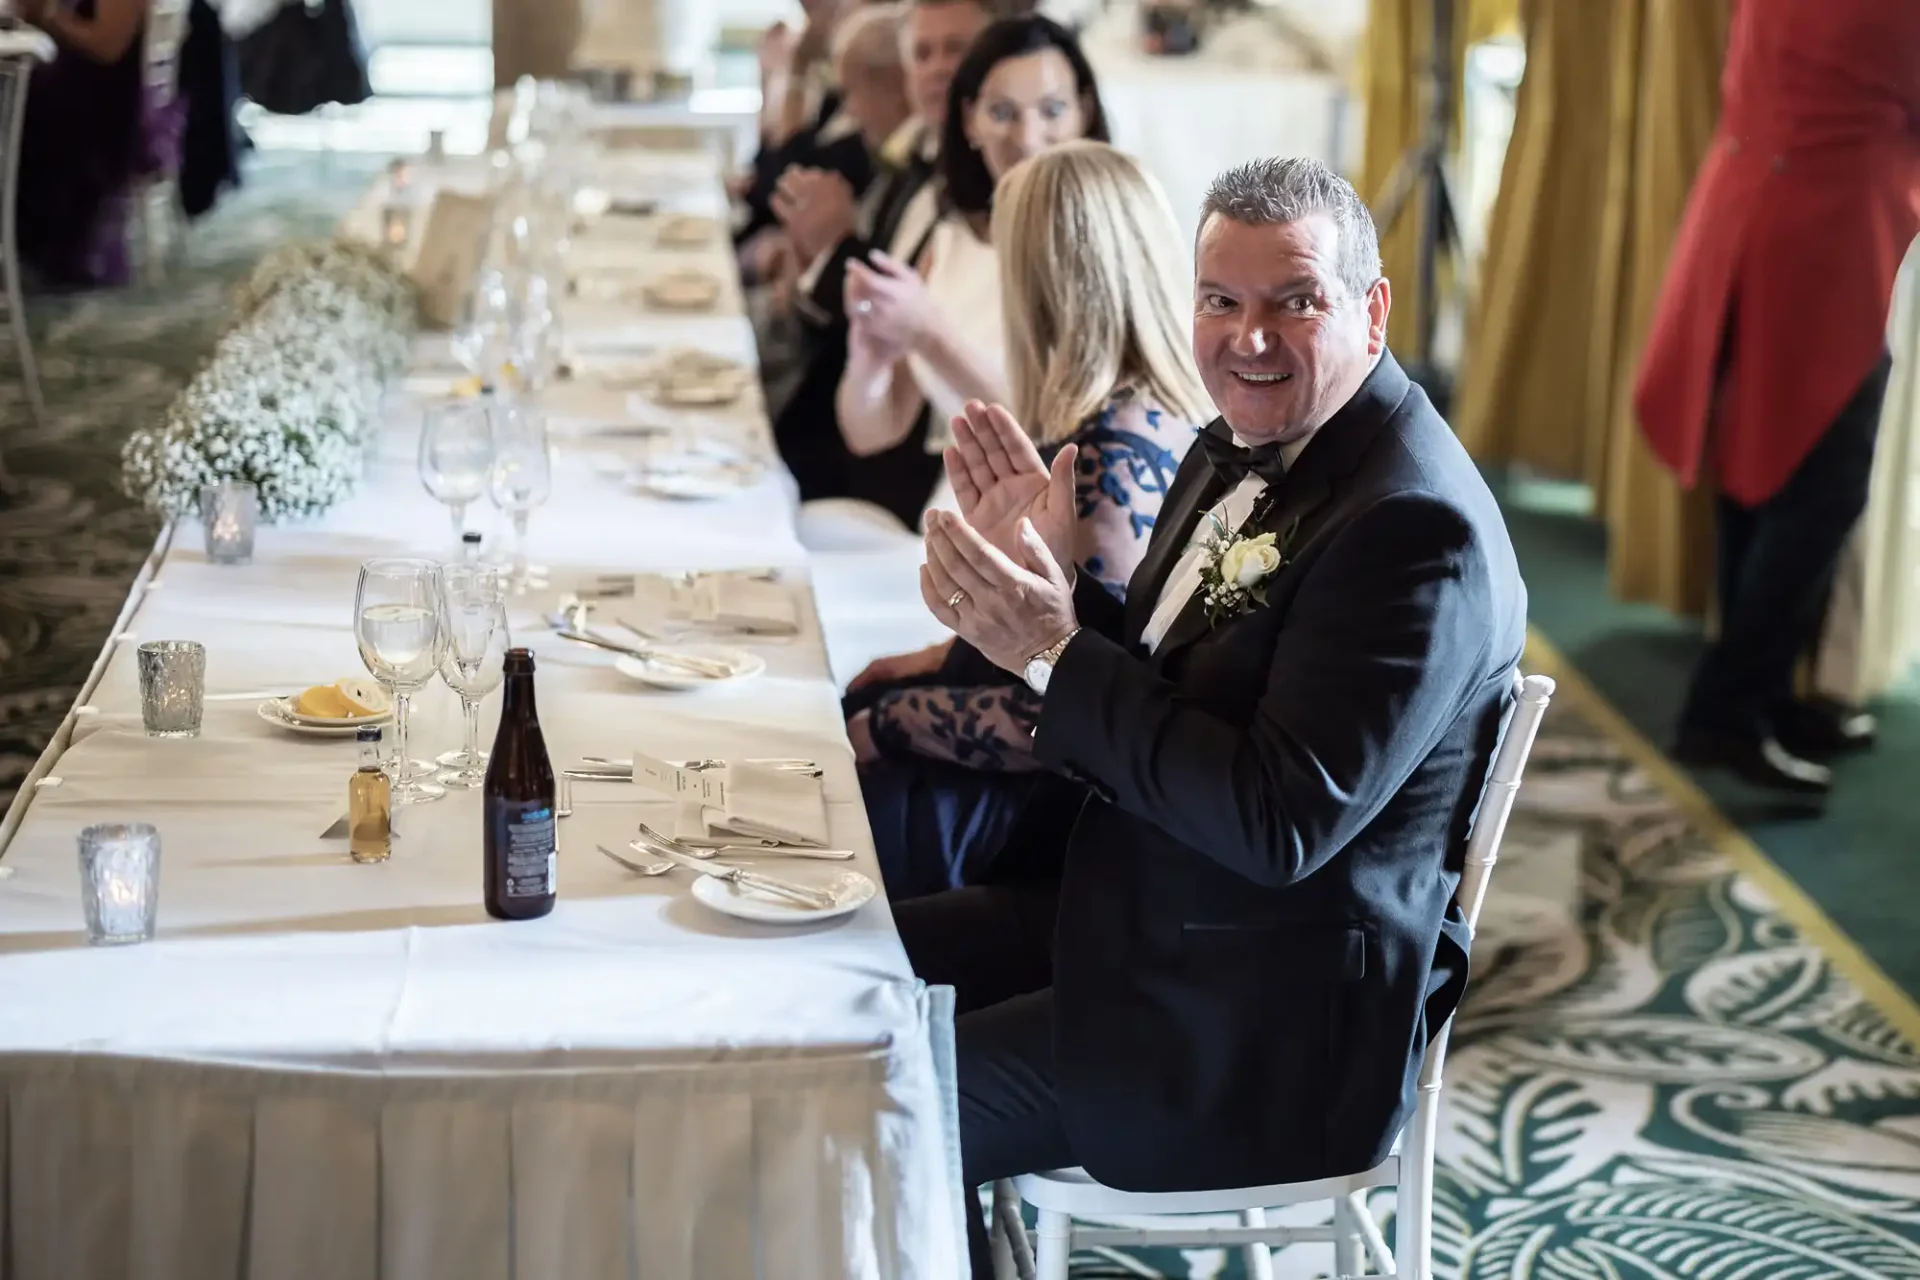 A man in a suit claps at a formal dining table during an event, surrounded by other guests.